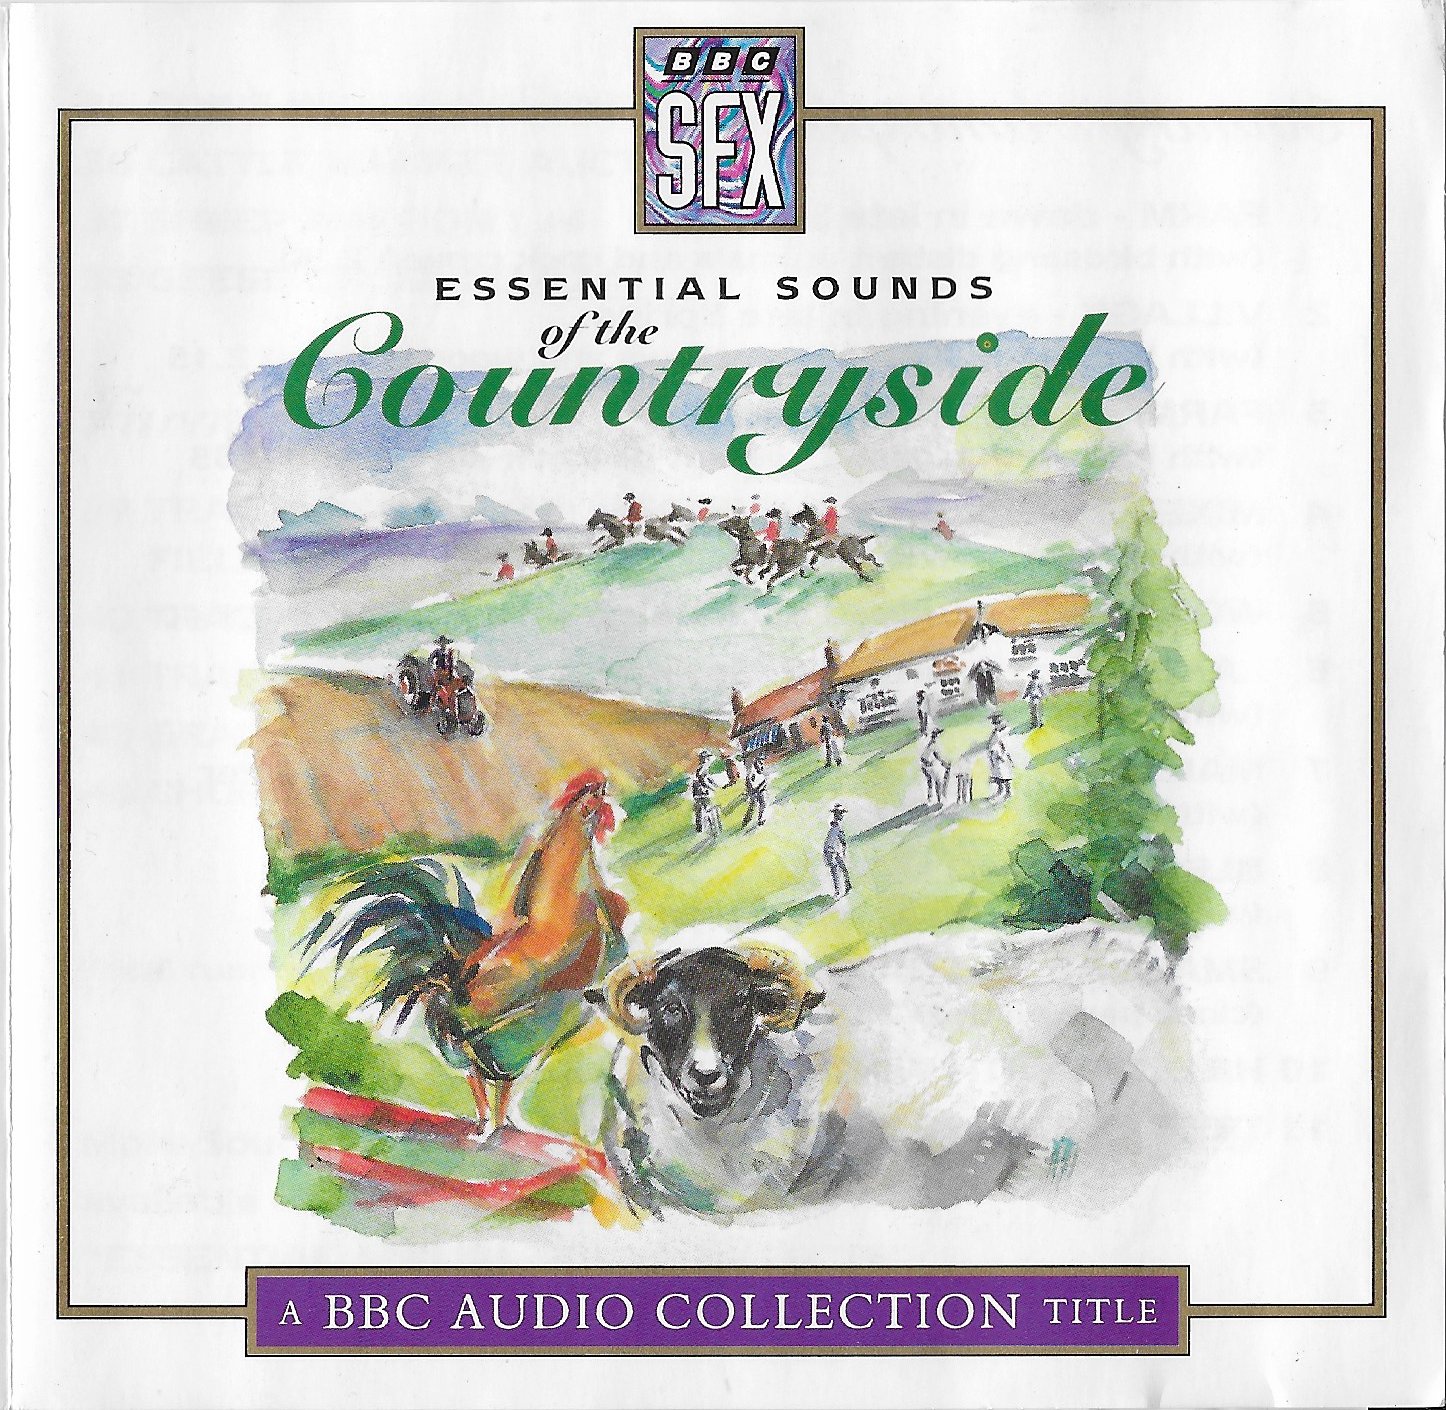 Picture of Essential sounds of the countryside by artist Various from the BBC cds - Records and Tapes library